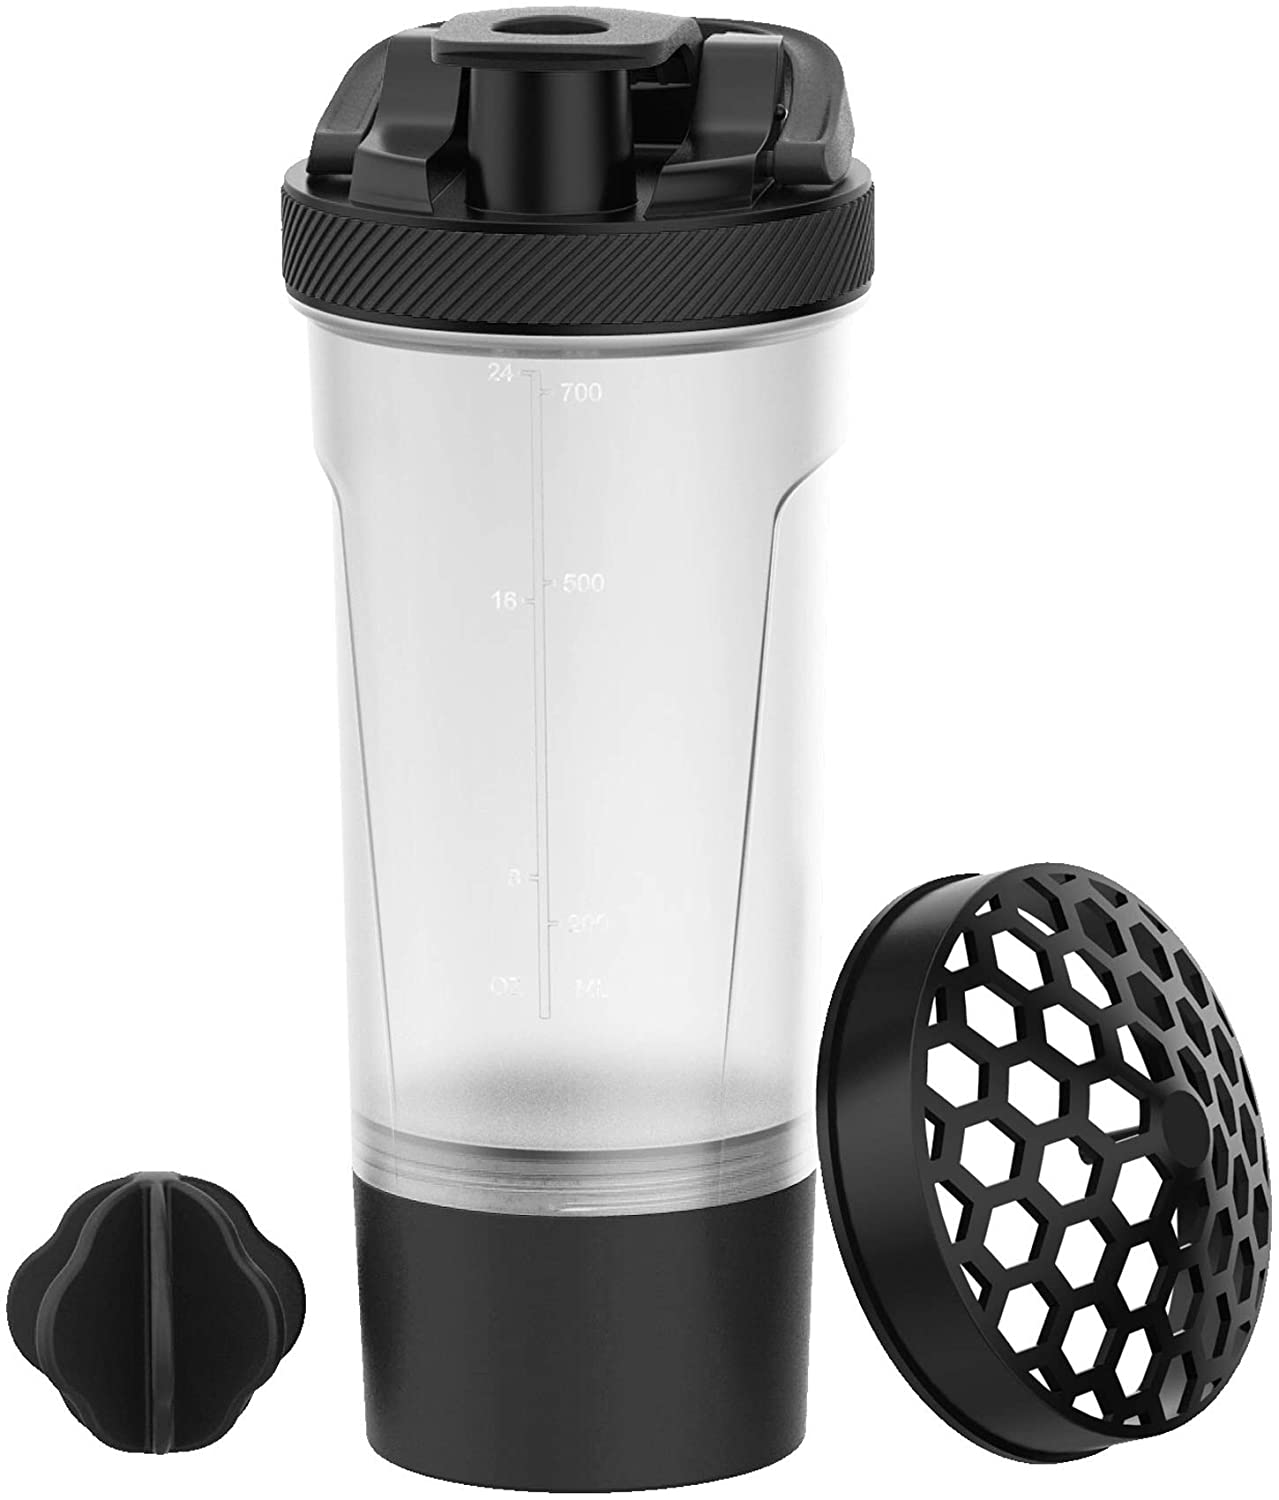 Utopia Home 2-Pack Shaker Bottle - 24 Ounce Protein Shaker Bottle for Pre &  Post workout drinks - Classic Protein Mixer Shaker Bottle with Twist and